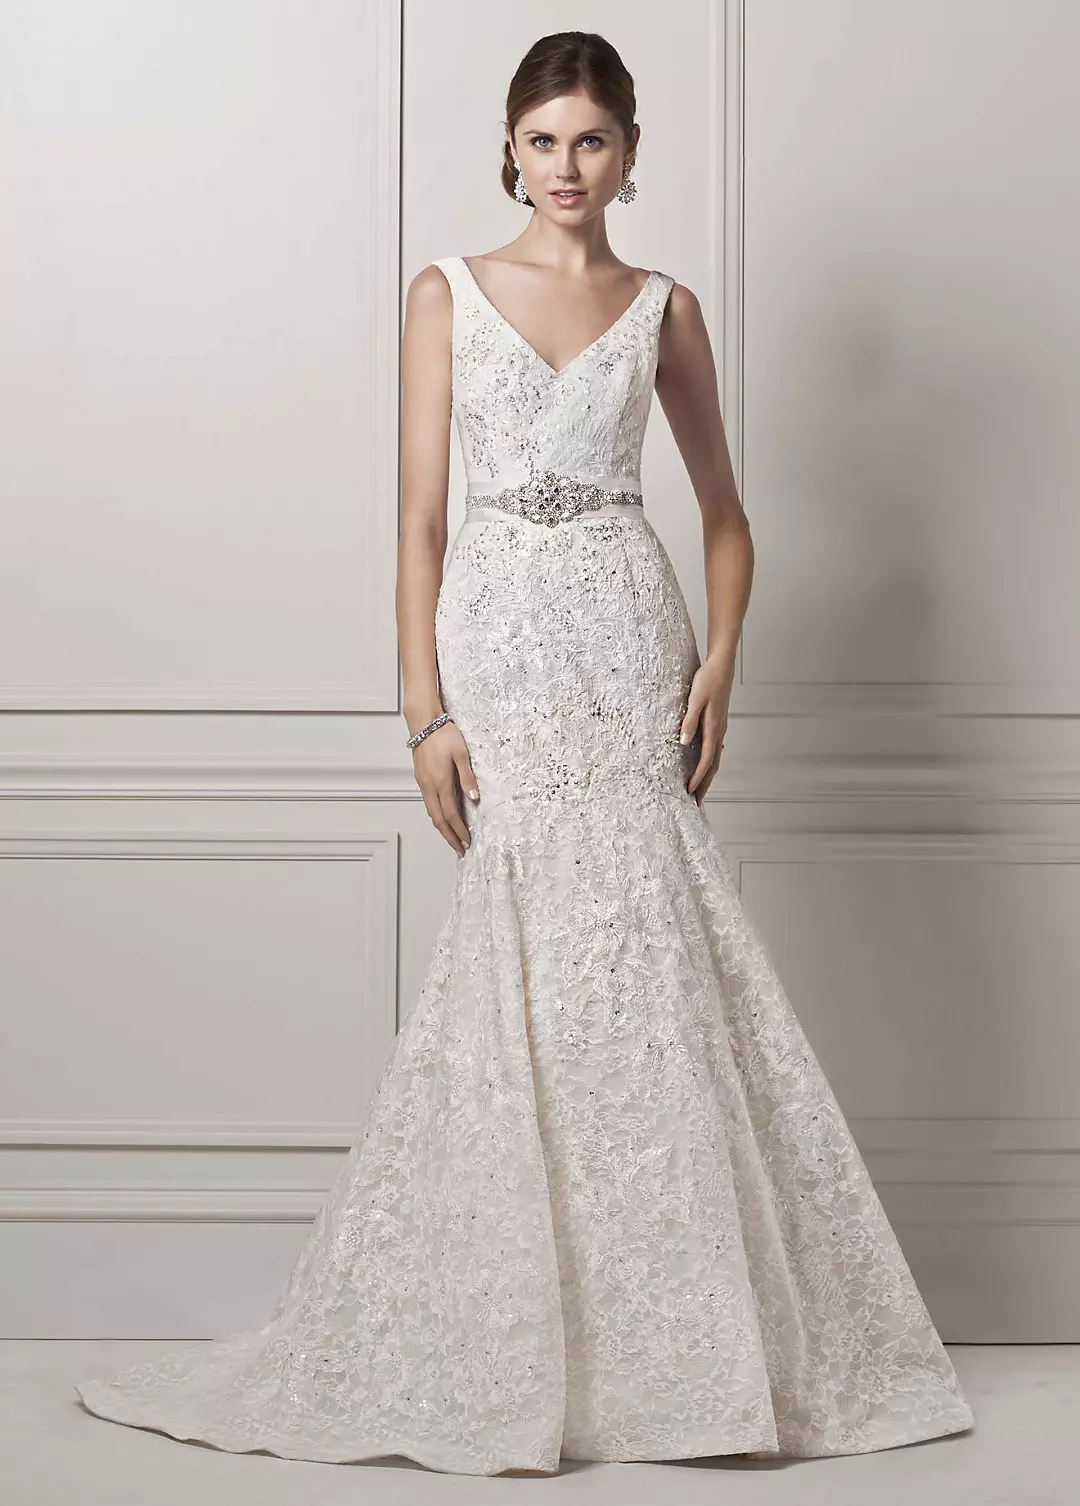 All Over Lace Trumpet Gown with Deep V Neckline Image